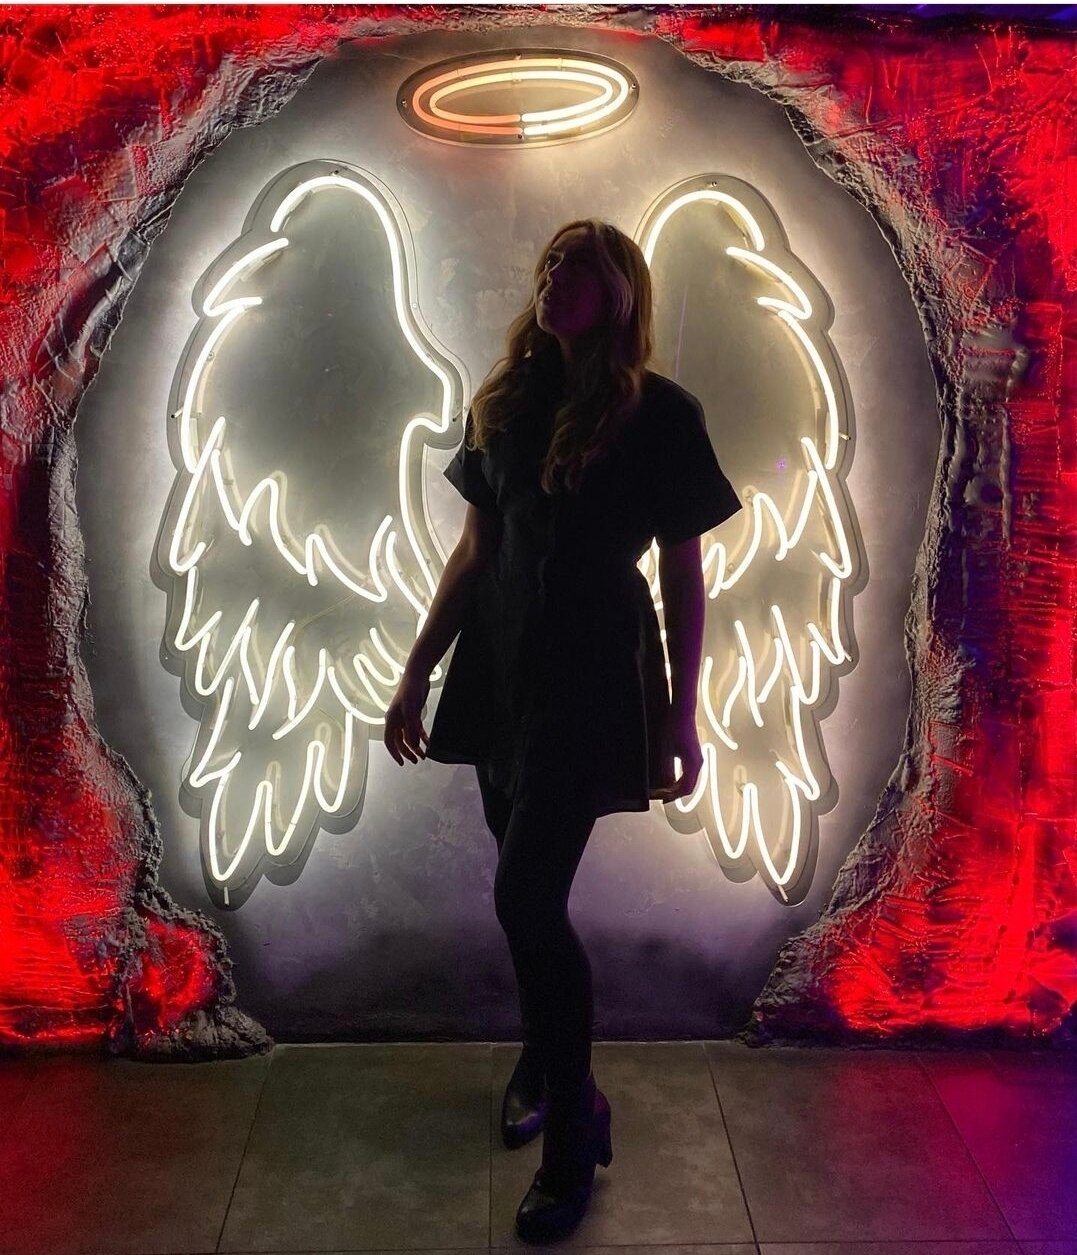 Angel's wings are made of a heart that's not afraid to fly🕊️⁠ @dilekkalee⁠
⁠
Tag us @cieloprlr to be featured on our page 💞⁠
⁠
Make a reservation:⁠
📞 020 3982 0890⁠
🌐 cieloprlr.co.uk⁠
📍 1 Charcot Rd, London NW9 5HG⁠
.⁠
.⁠
.⁠
#cieloprlr #influenc